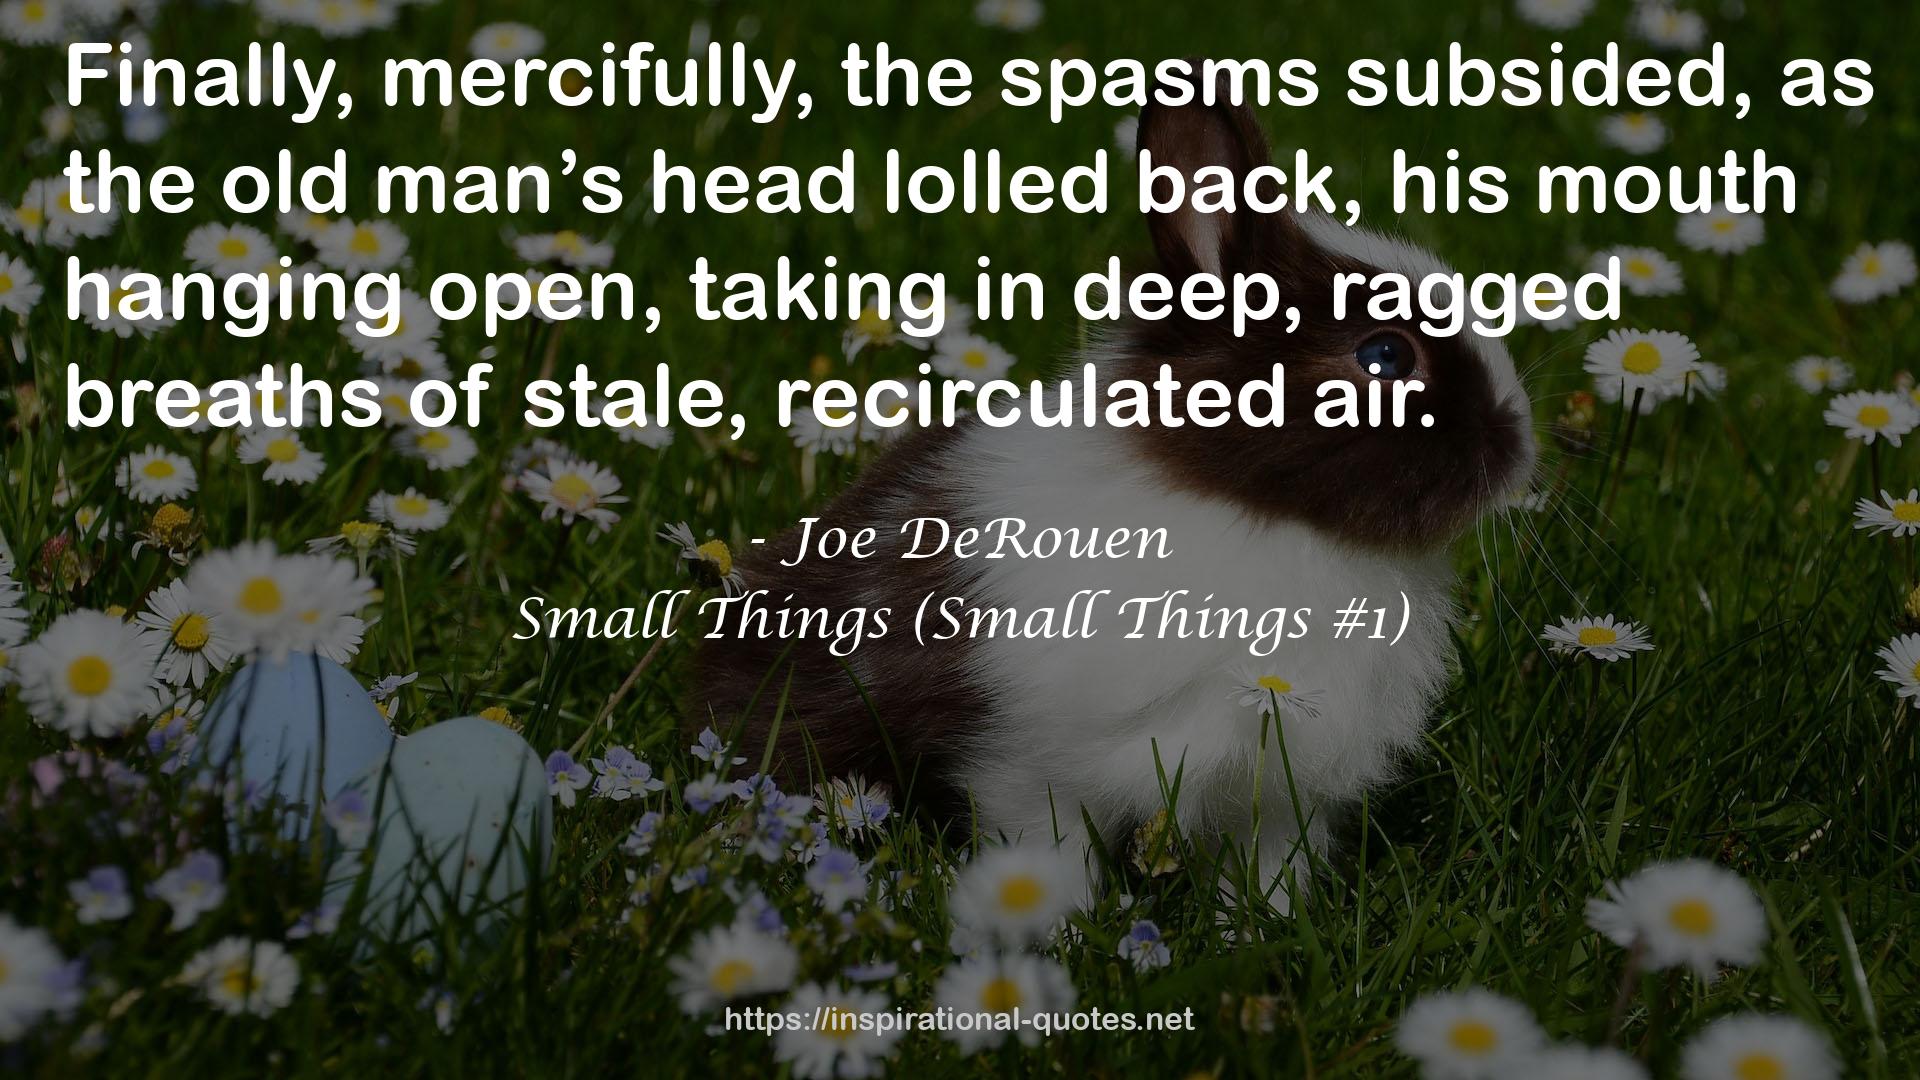 Small Things (Small Things #1) QUOTES